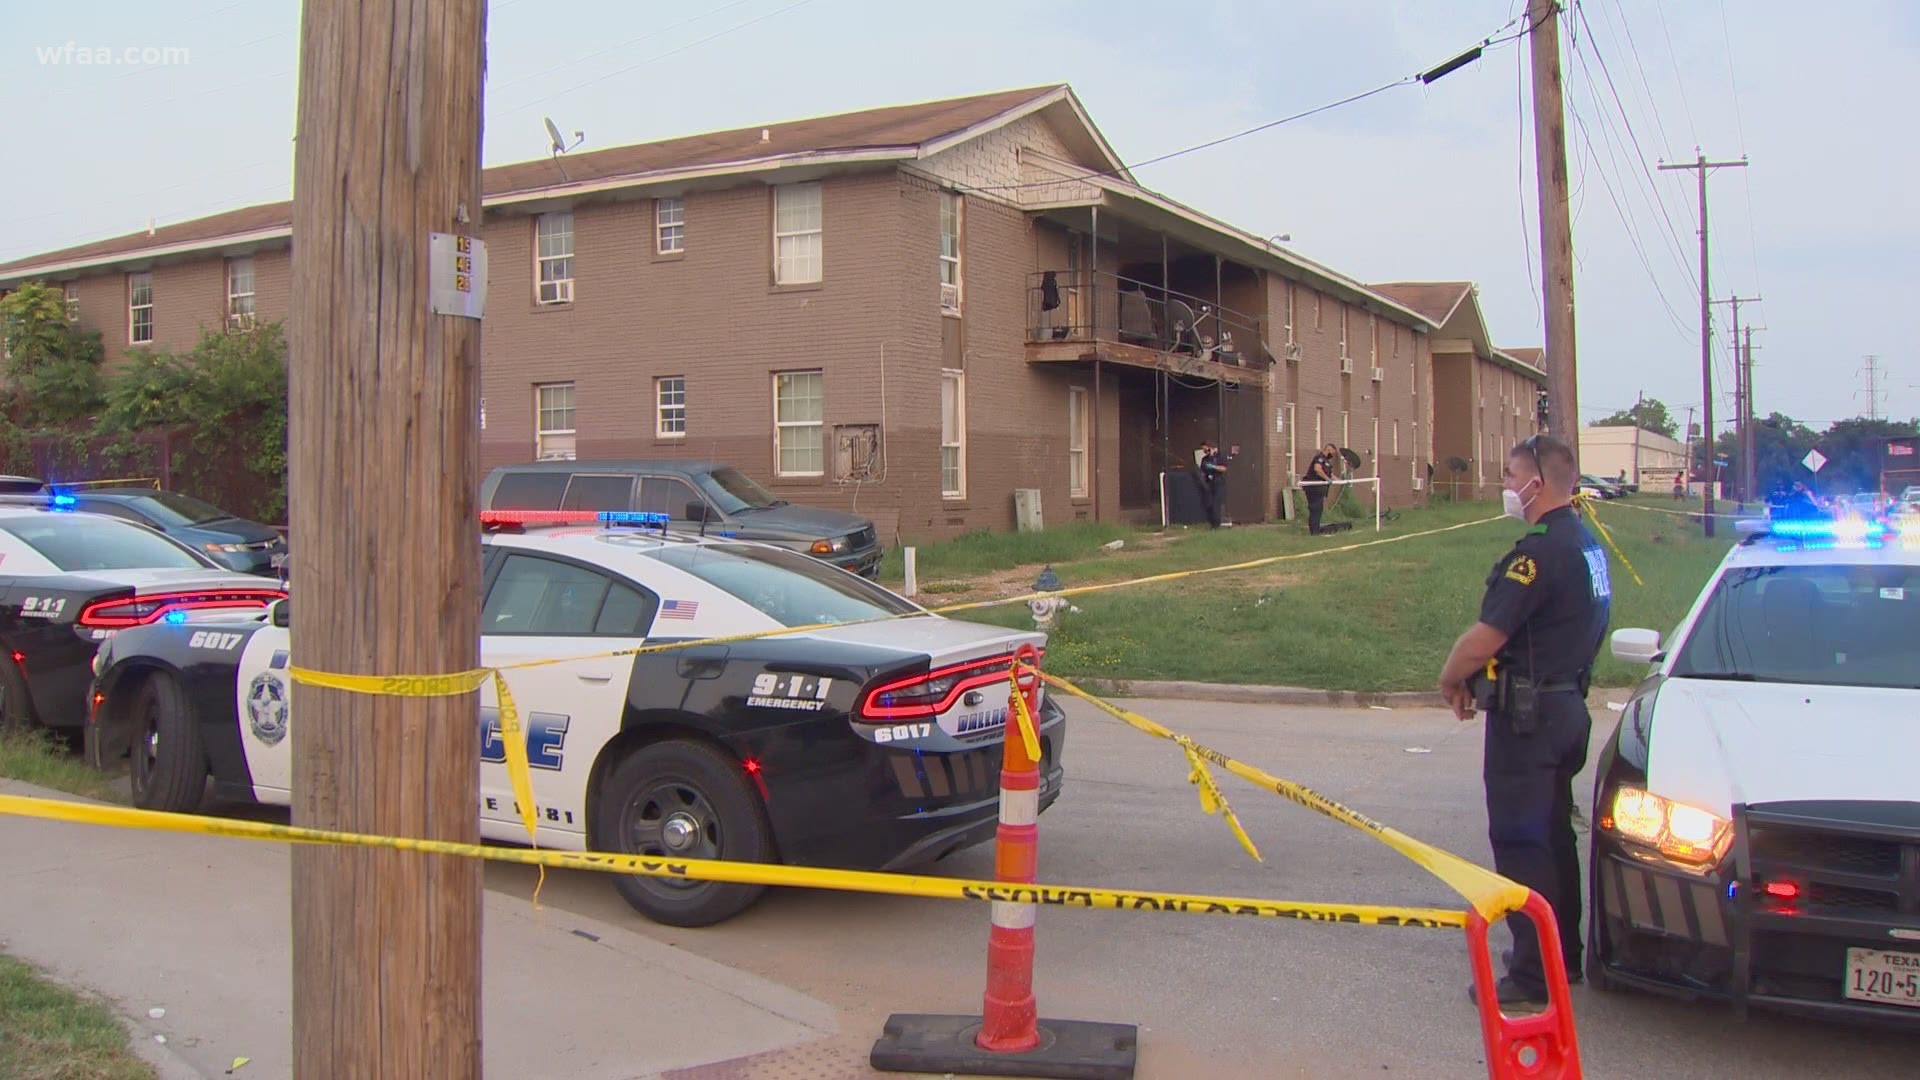 Officers were busy at several crime scenes in Dallas last week. Among them, a triple-homicide at a motel.